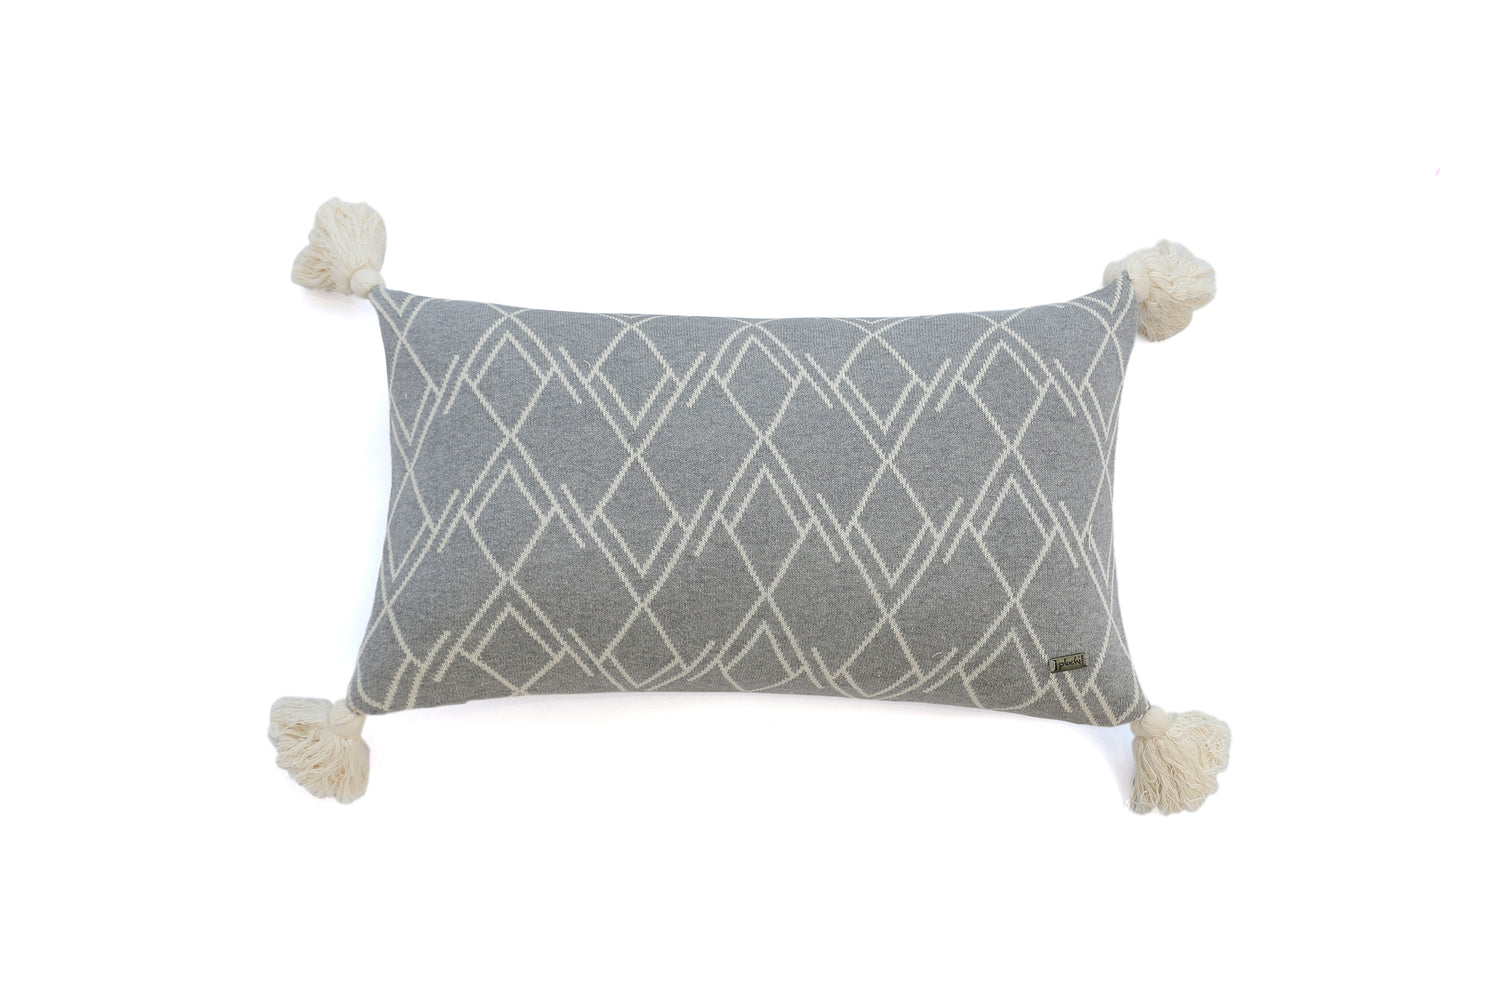 Gianna - Light Grey &amp; Natural Color Cotton Knitted Decorative Cushion Cover